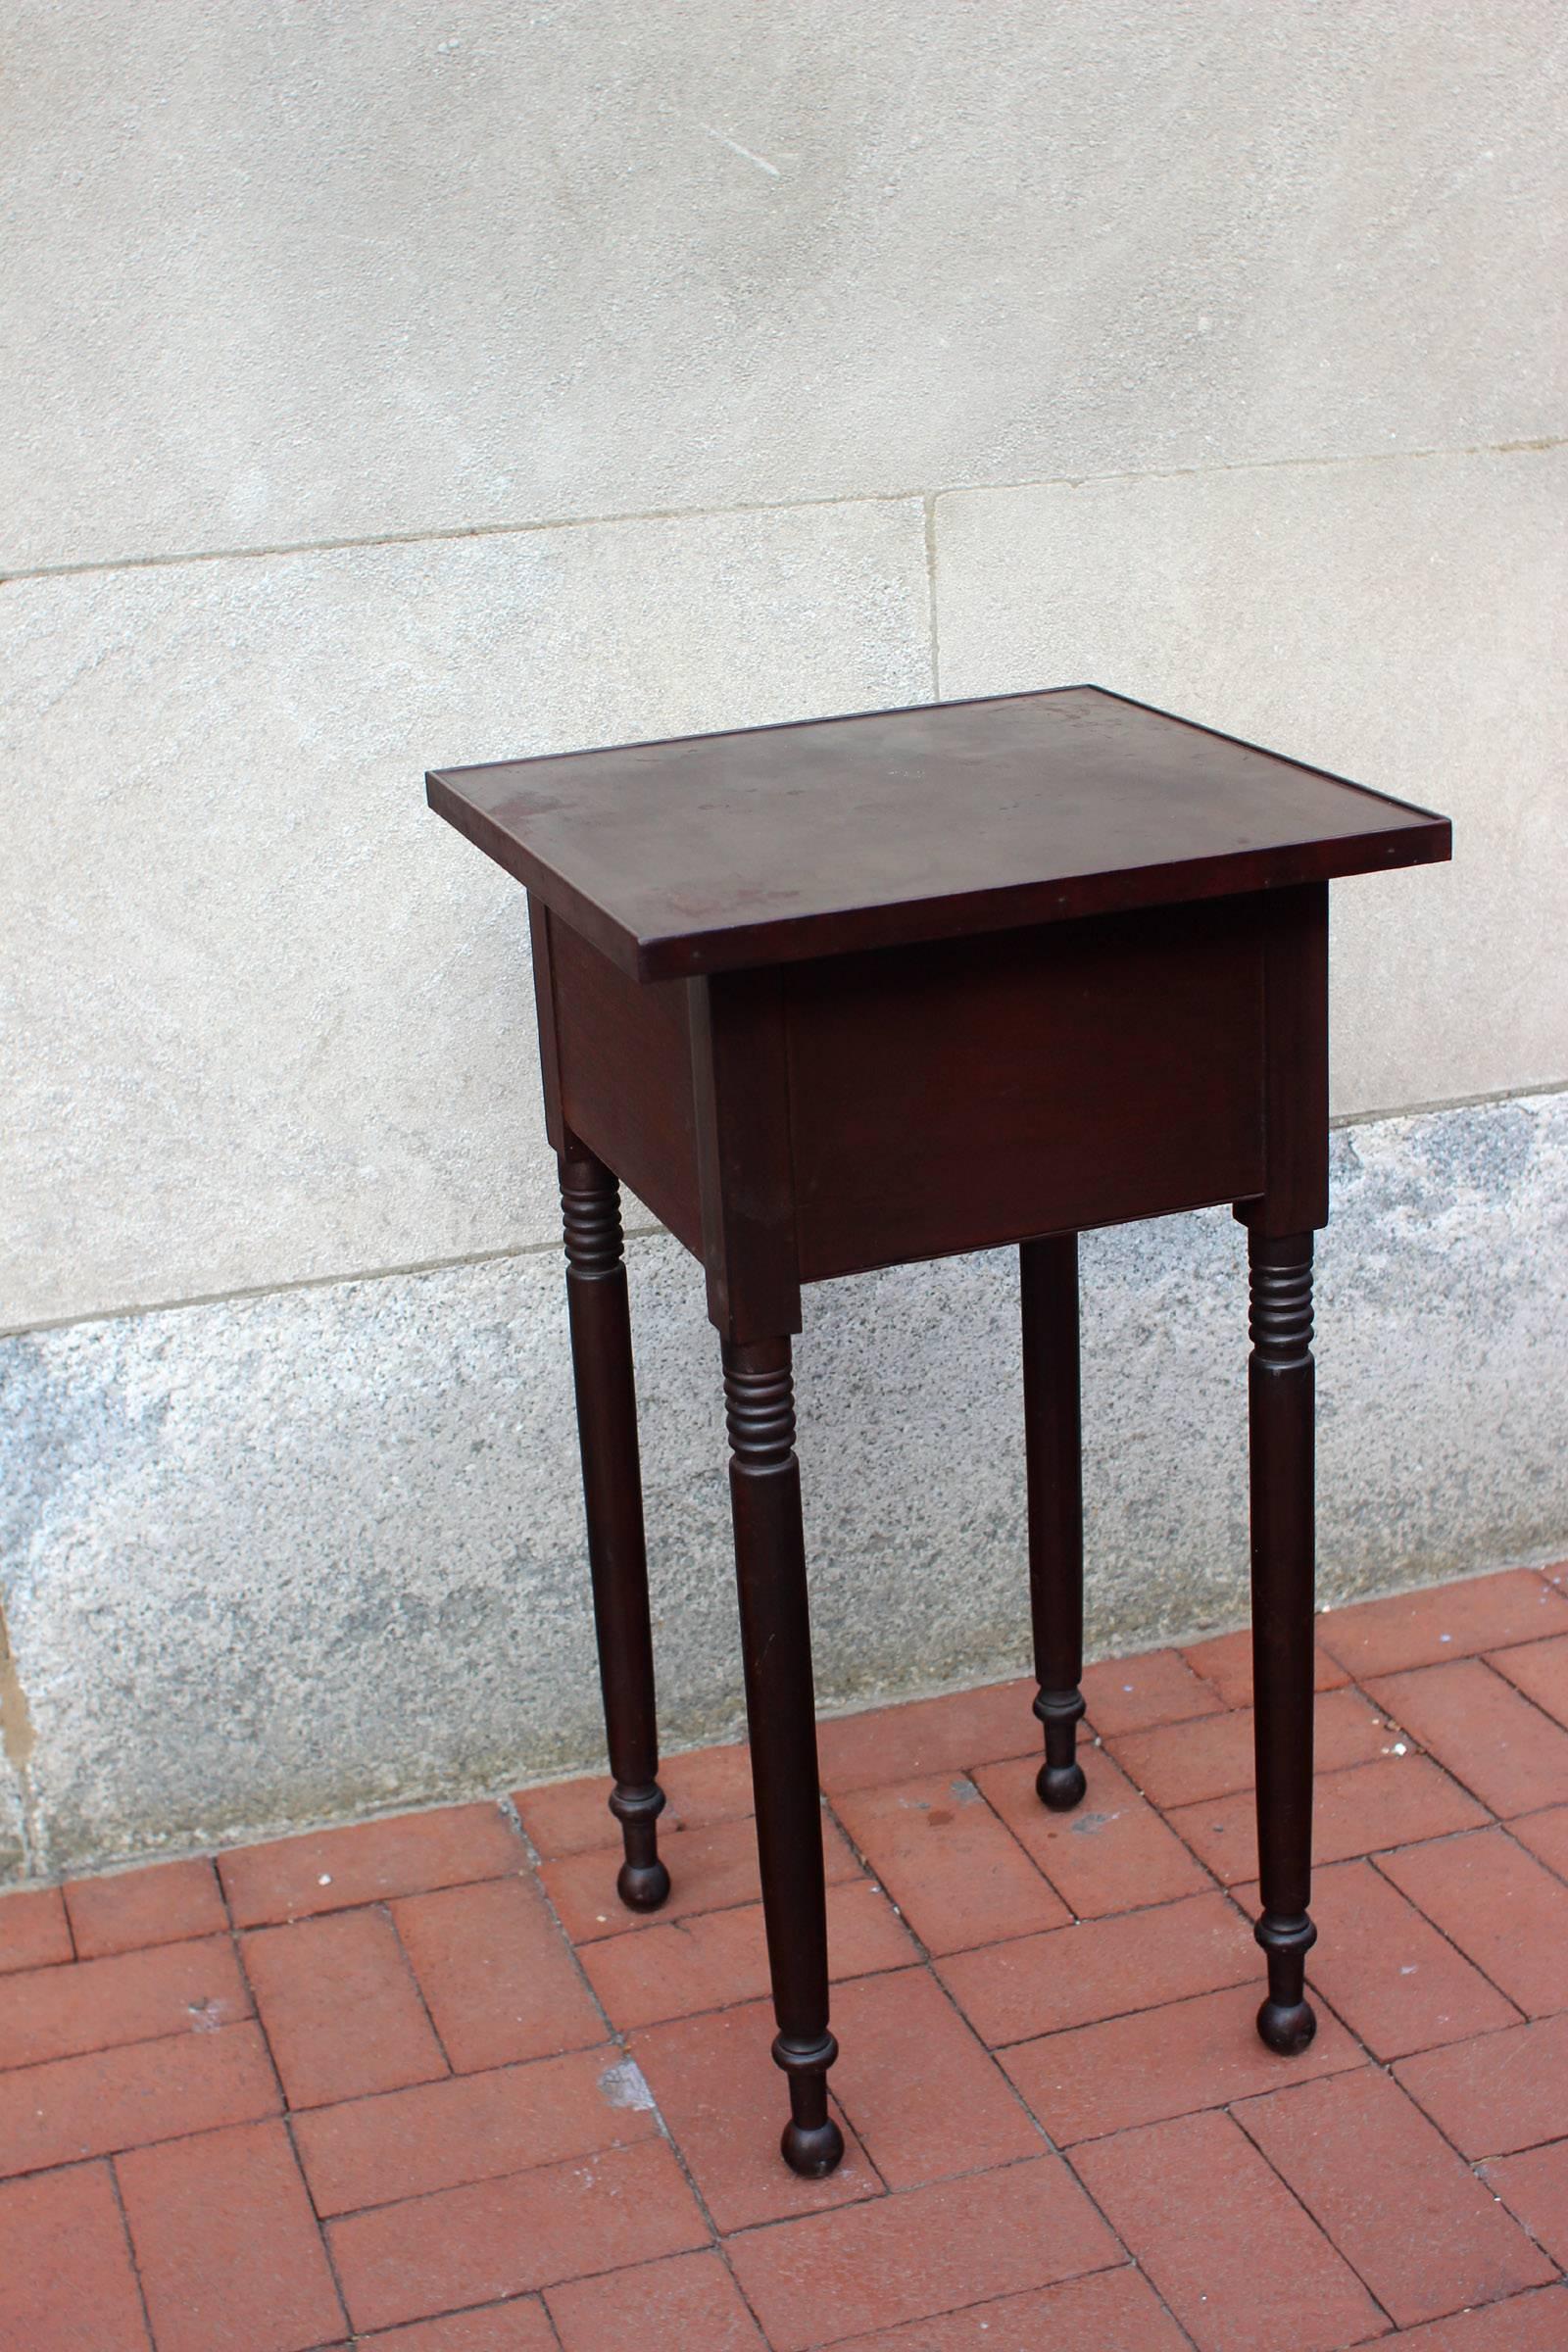 19th Century American One-Drawer Stand 1